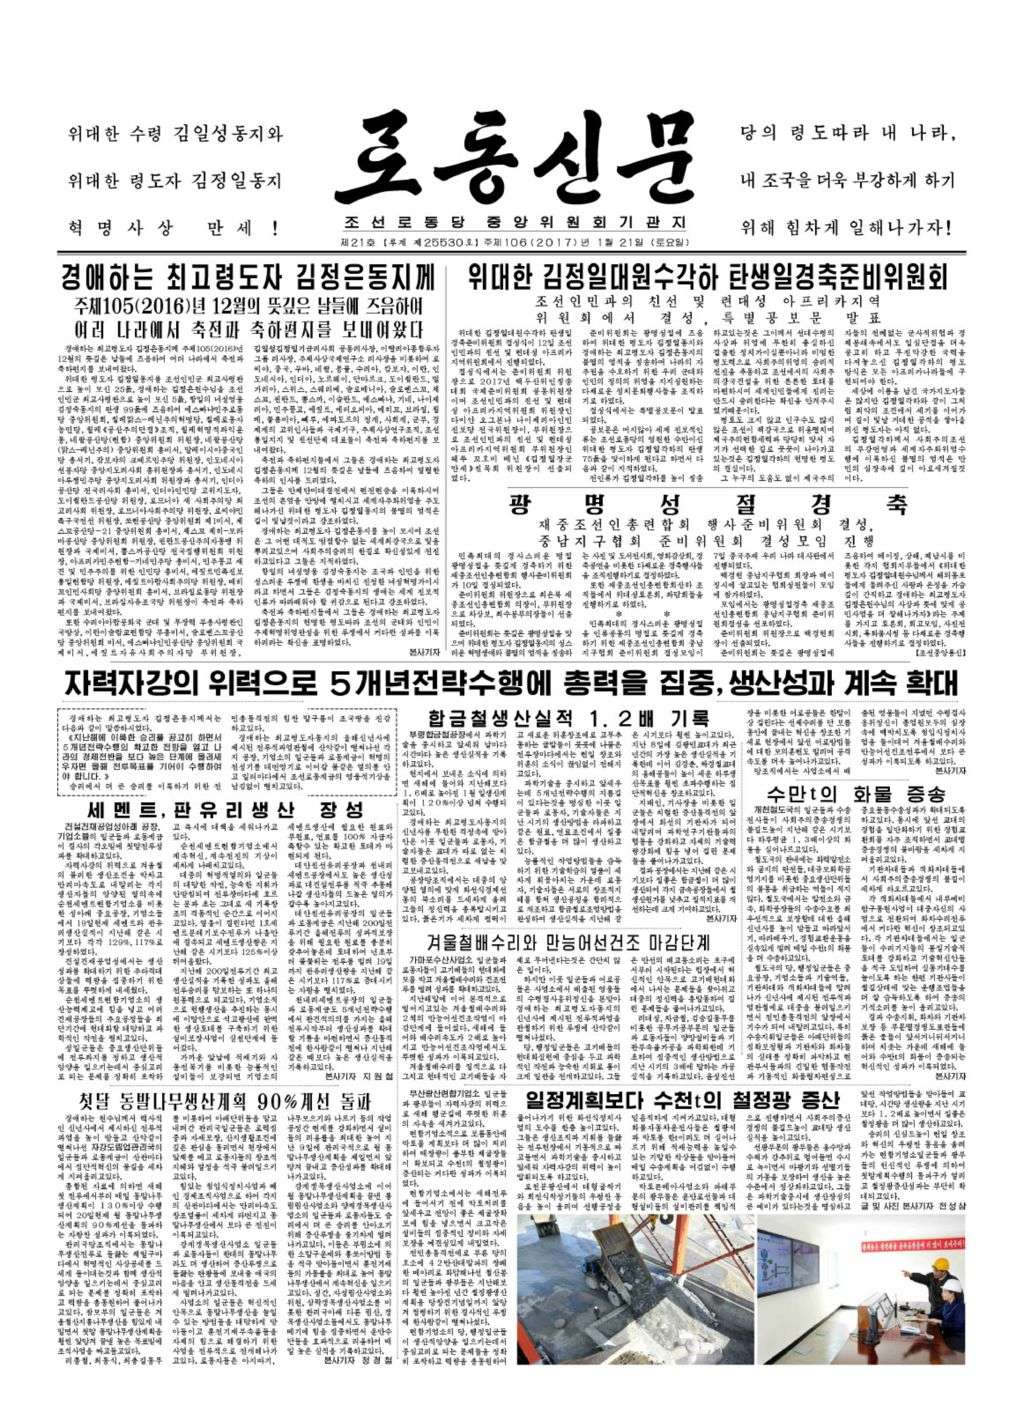 The January 21 edition Rodong Sinmun, the official newspaper of North Korea’s ruling Workers’ Party. A short article about Trump’s inauguration appeared at the bottom of the last page of the January 22 edition. Photo: KCNA Watch